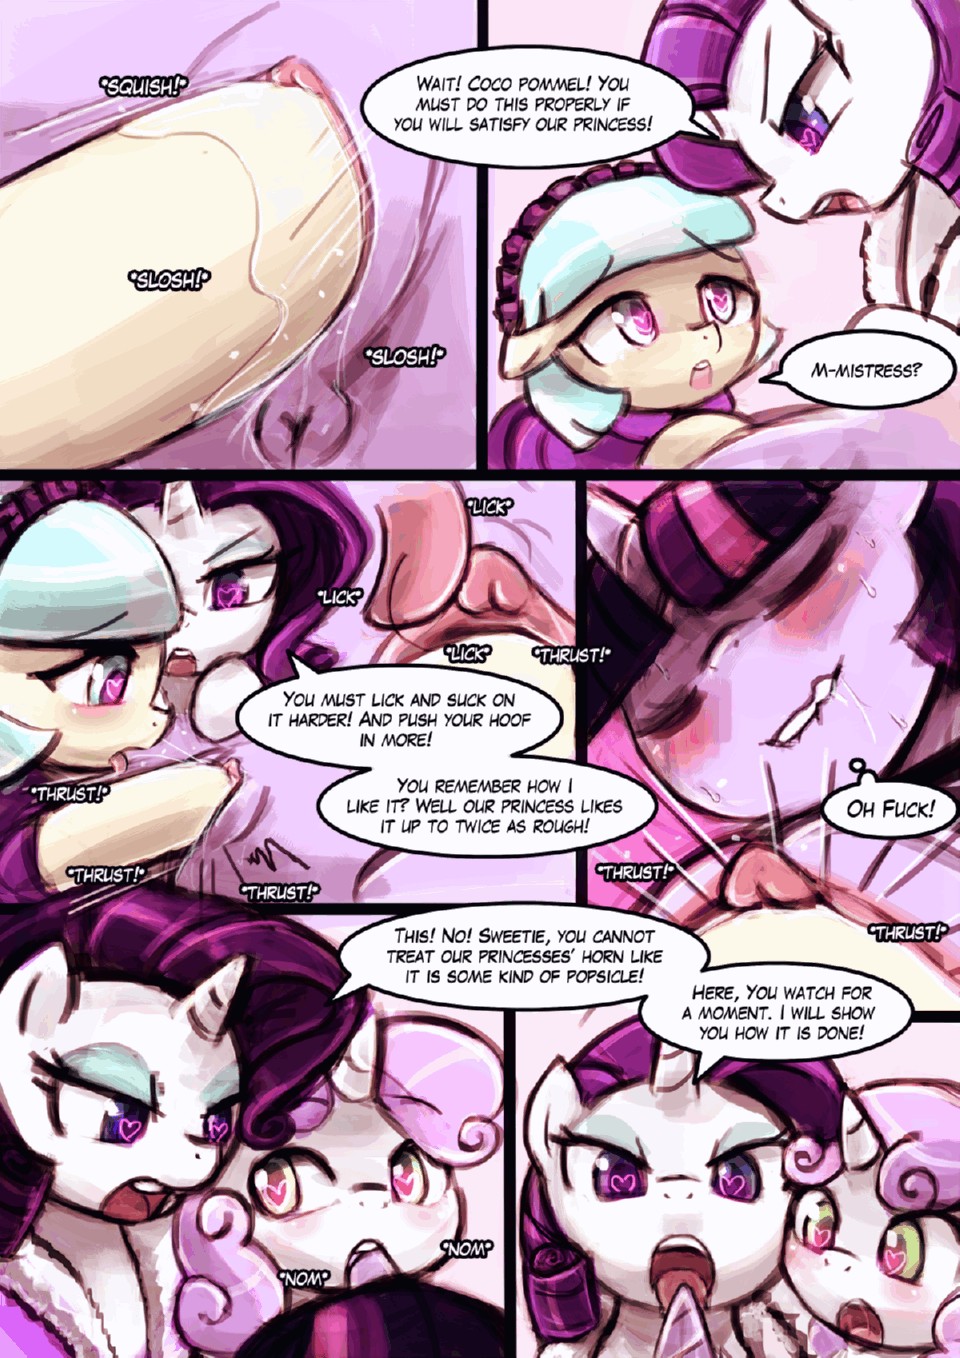 Hot Cocoa with Marshmallows porn comic page 007